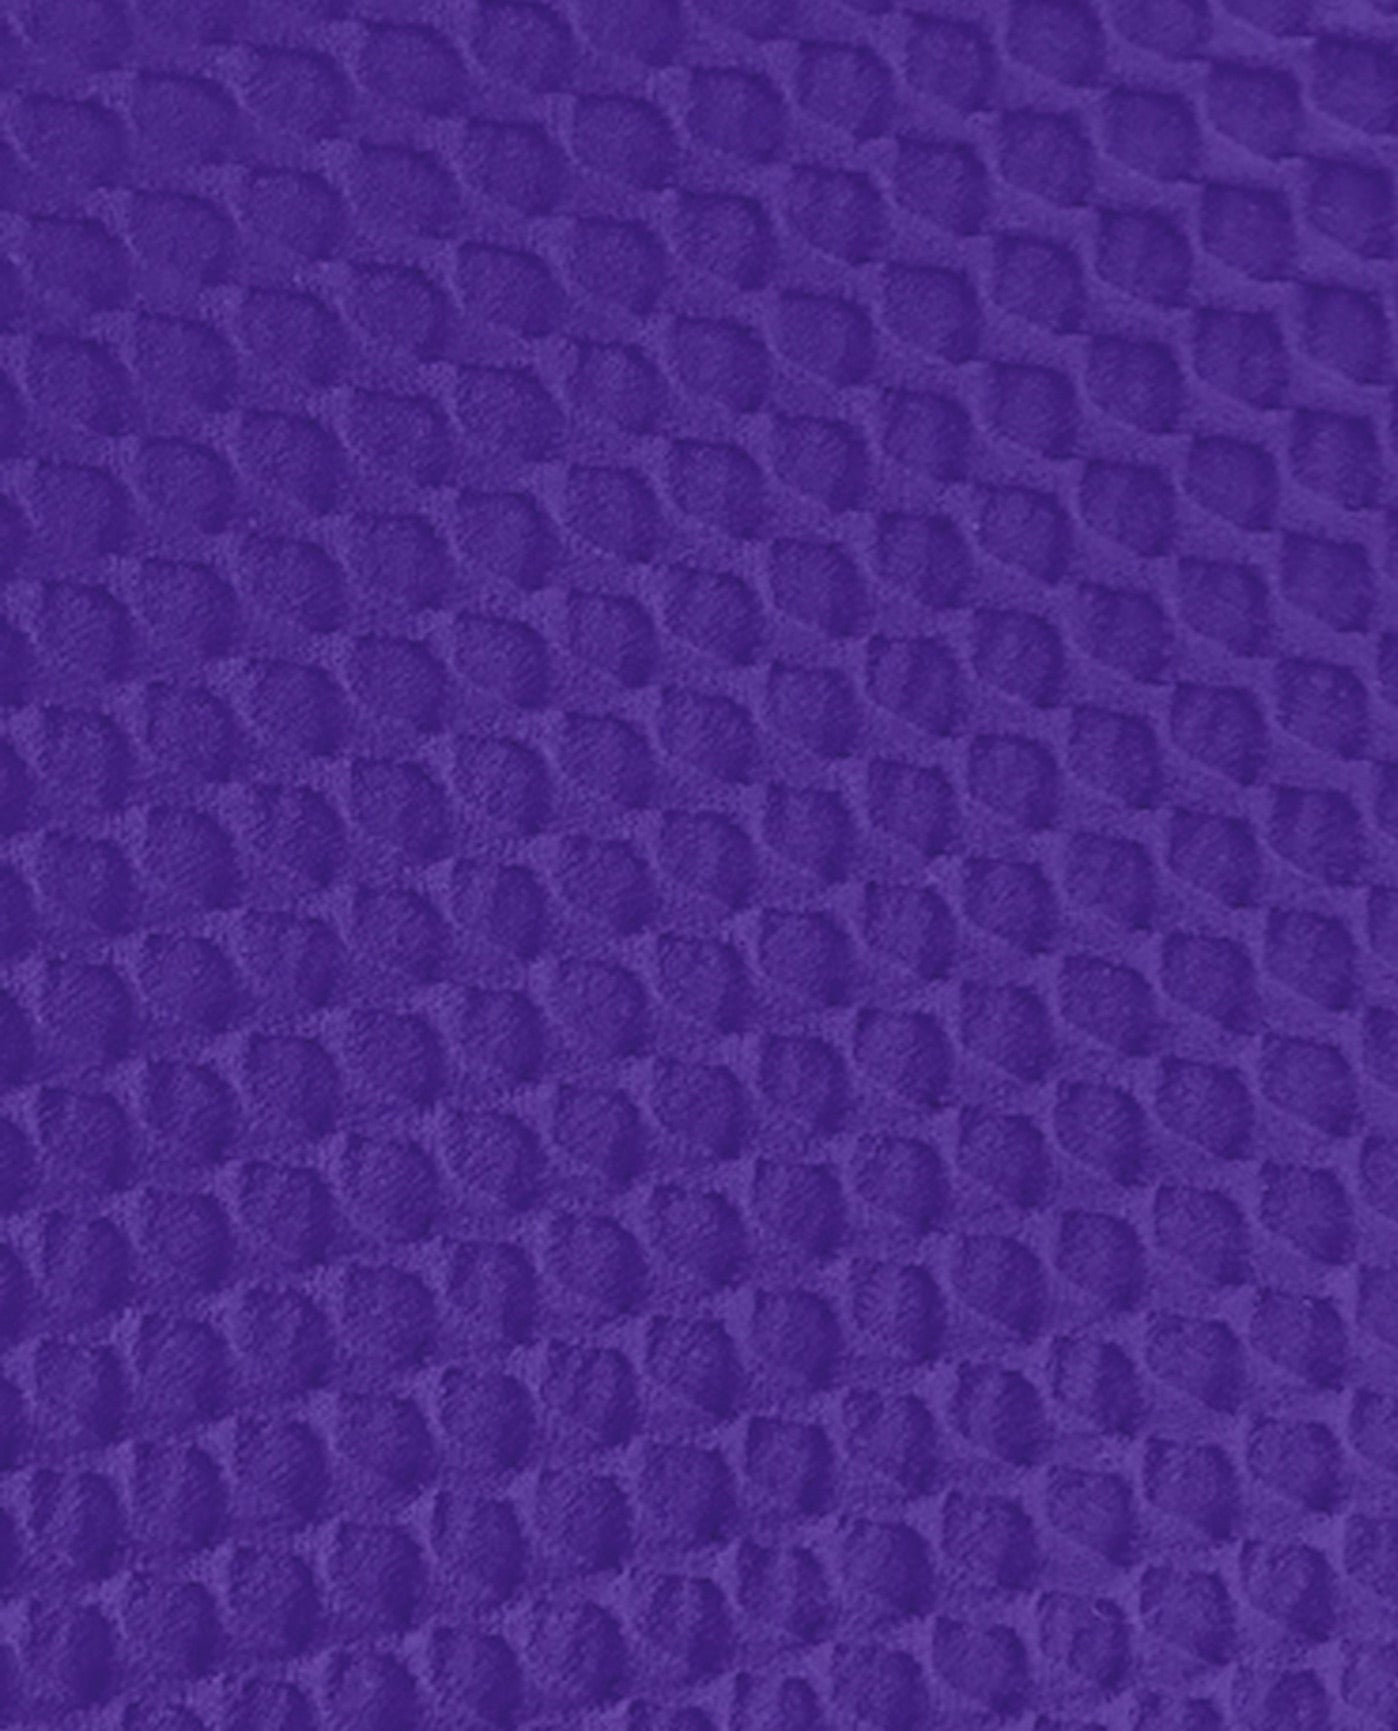 FABRIC SWATCH VIEW OF CHLORINE RESISTANT AQUAMORE COLOR BLOCK TEXTURED HIGH NECK PLUS SIZE SWIMSUIT | 057 AQT TEXTURED PURPLE